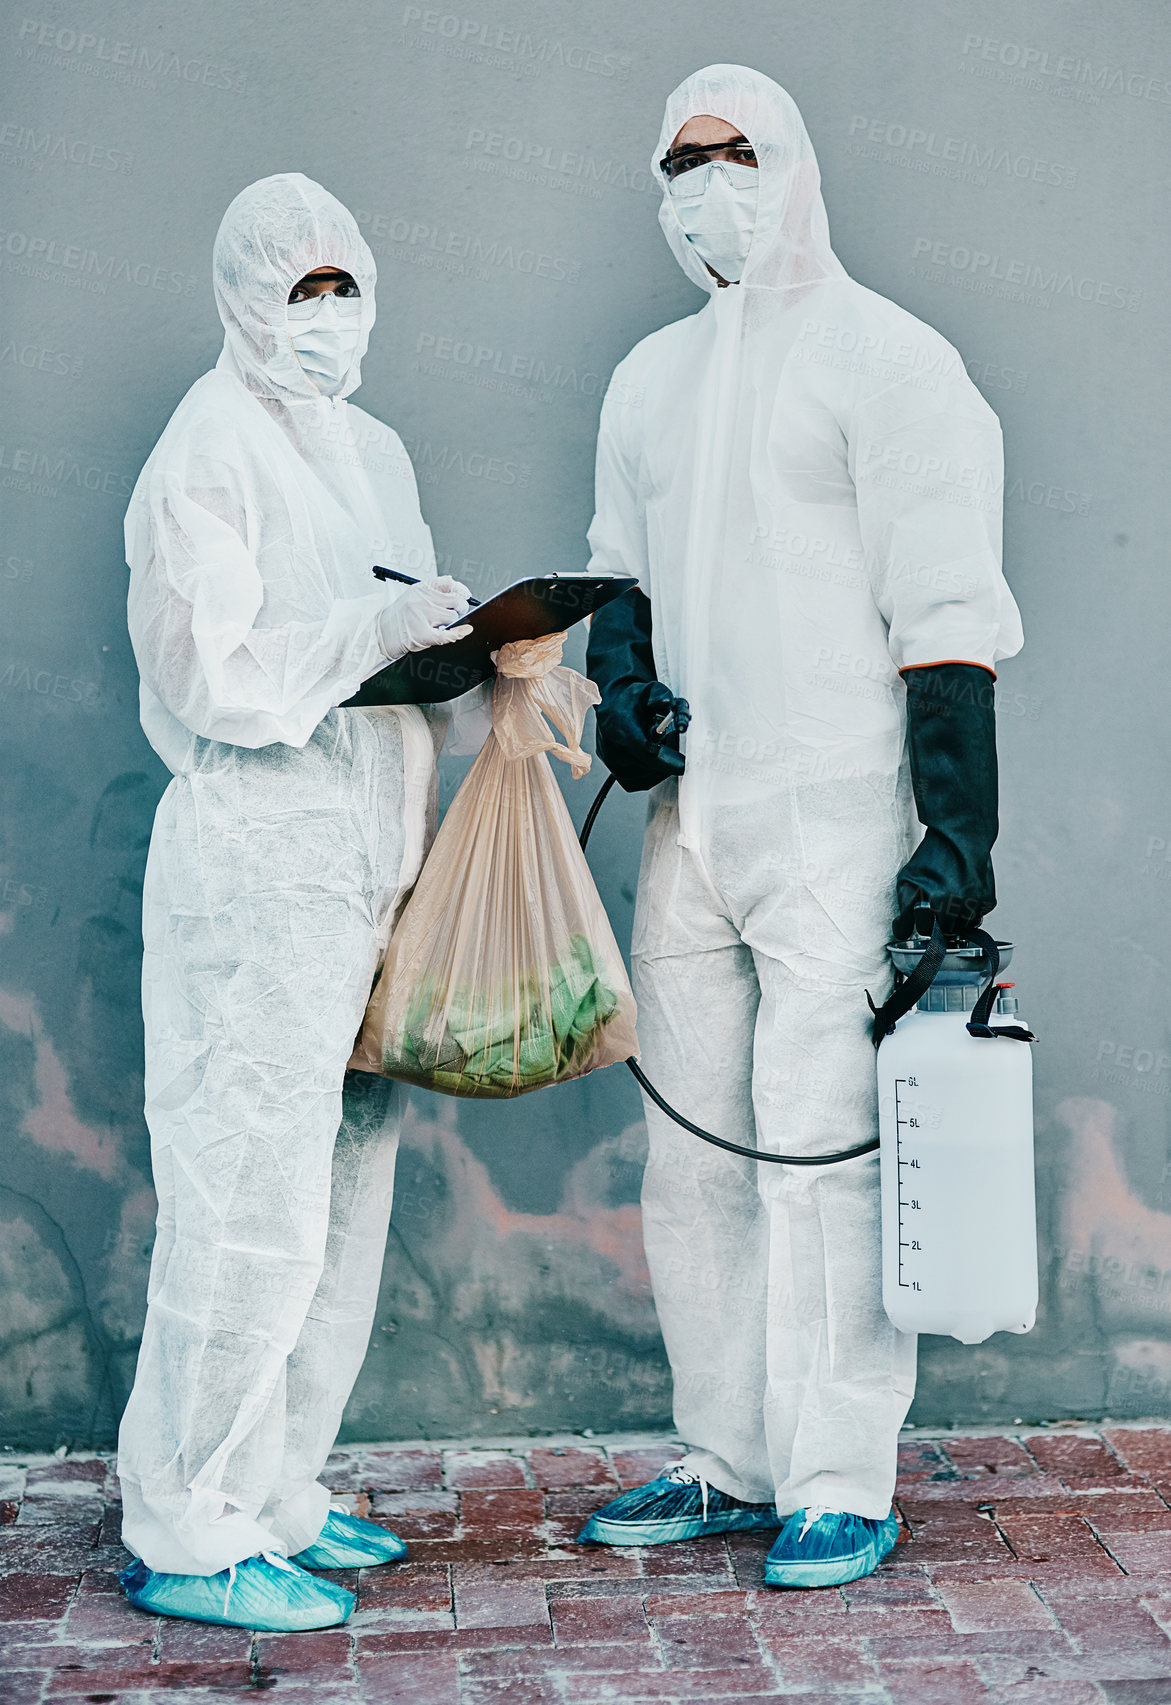 Buy stock photo Scientists disinfect isolated and dangerous area. Medical staff protect themselves with sterile equipment. Healthcare workers clean while wearing safety uniform to stop the spread of a virus.